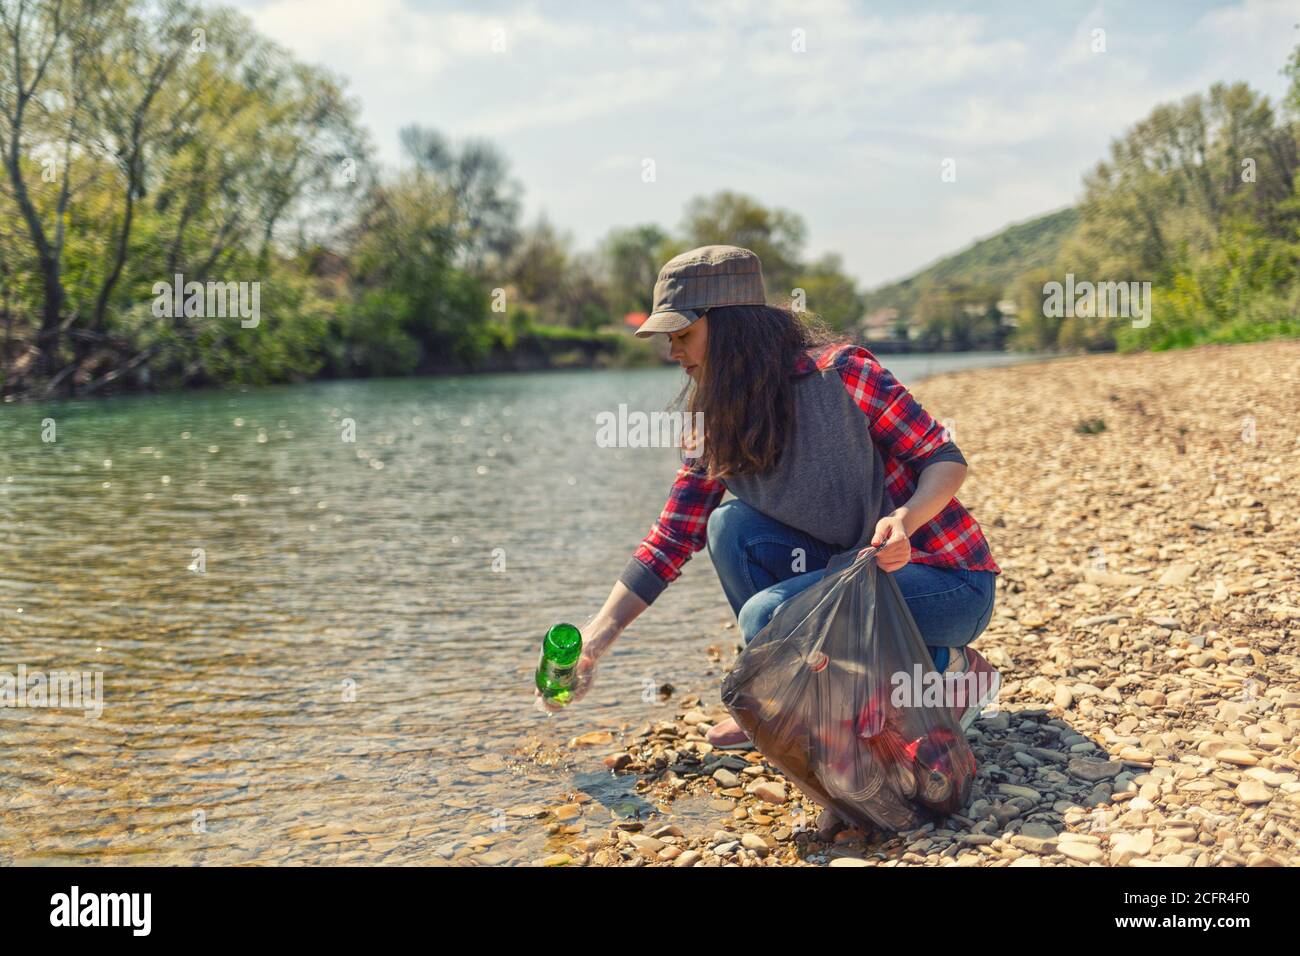 A woman volunteer pulls a bottle out of the water, during the event to clean the river Bank. Earth day and environmental improvement concept. Stock Photo